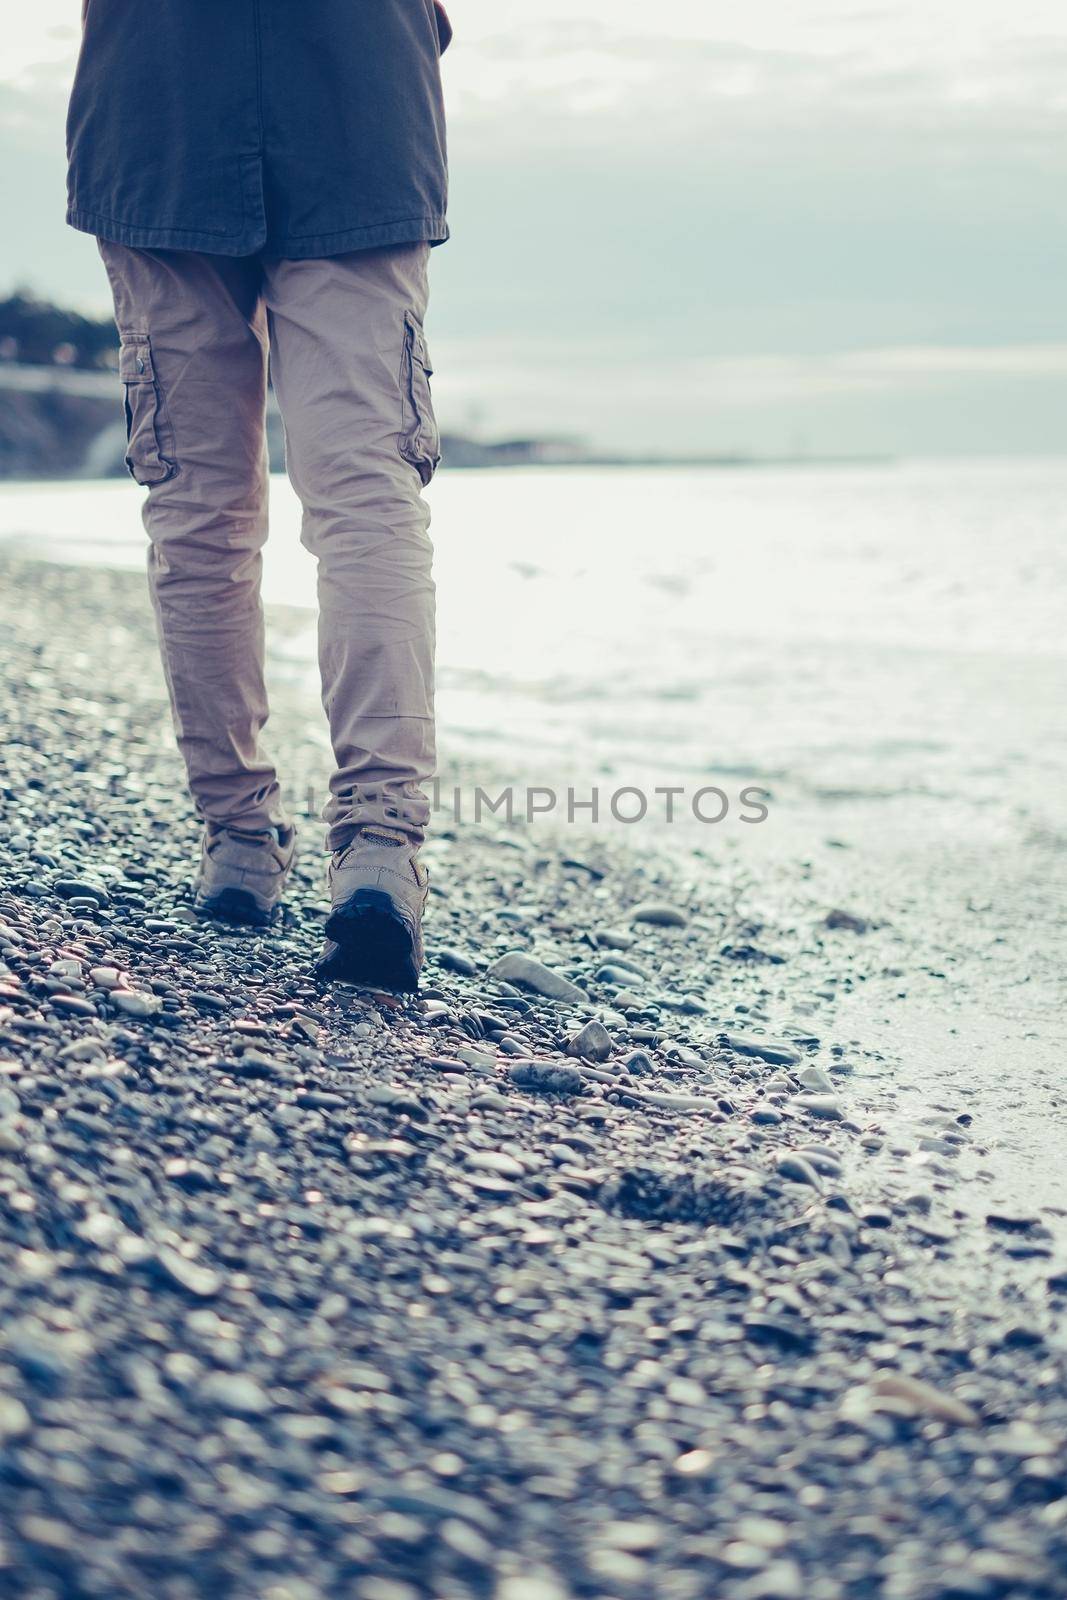 Traveler young woman walking on pebble coast near the sea, view of legs